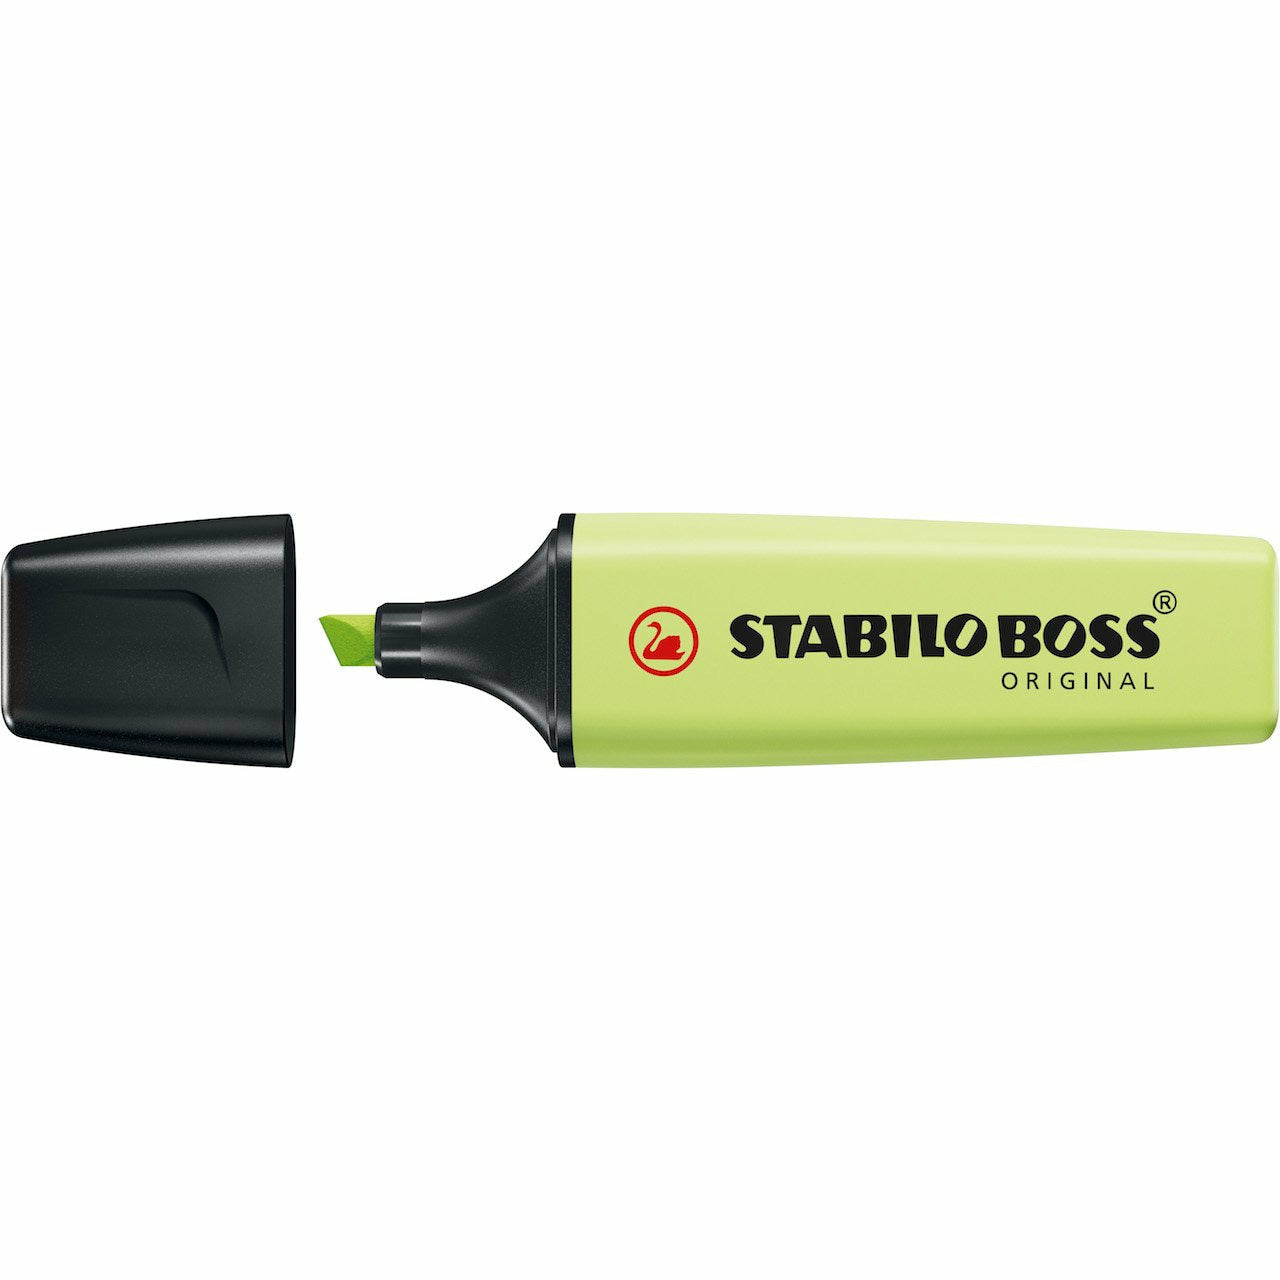 Stabilo Boss pastell dash of lime